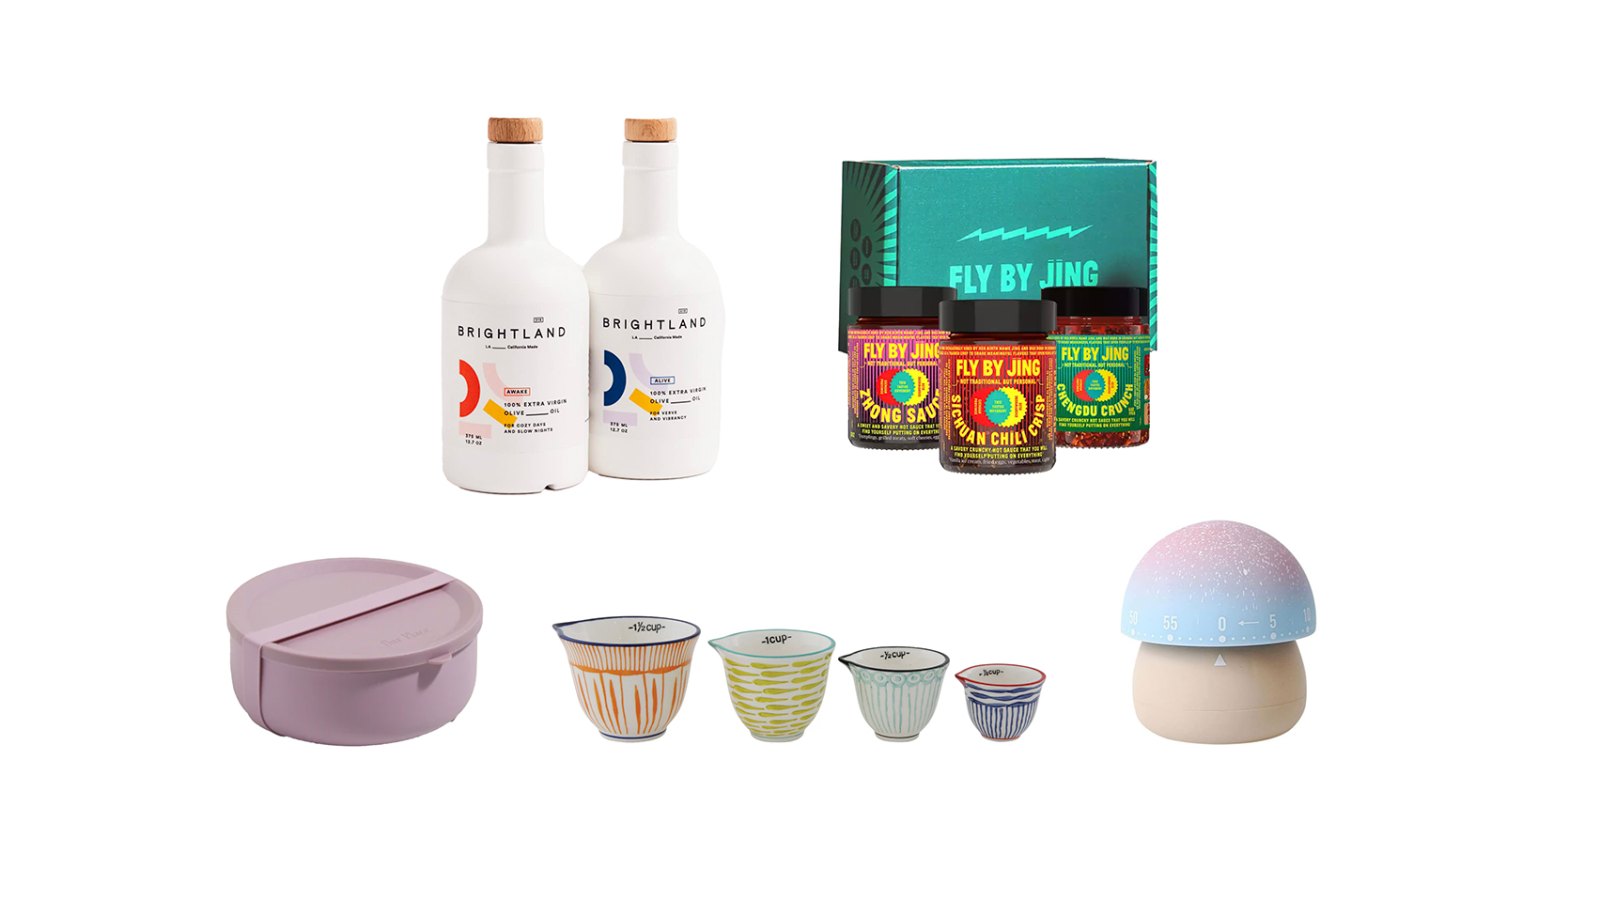 Gift Guide: Flavorful, Functional Gifts for People Who Love